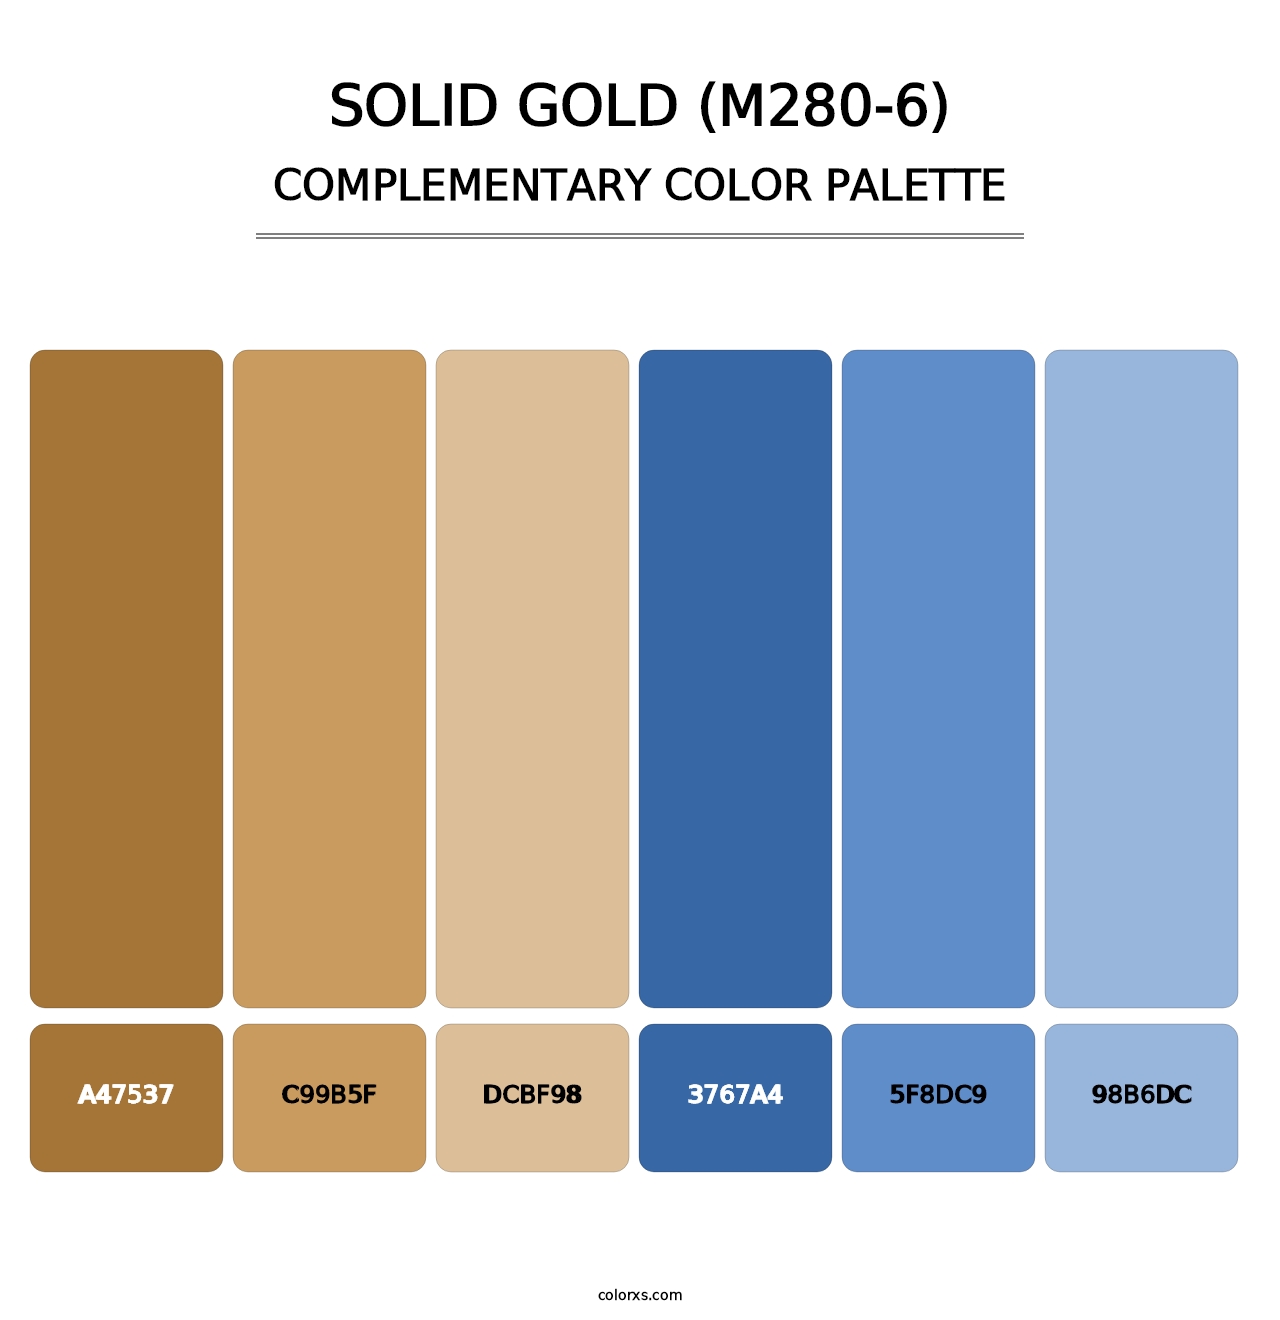 Solid Gold (M280-6) - Complementary Color Palette